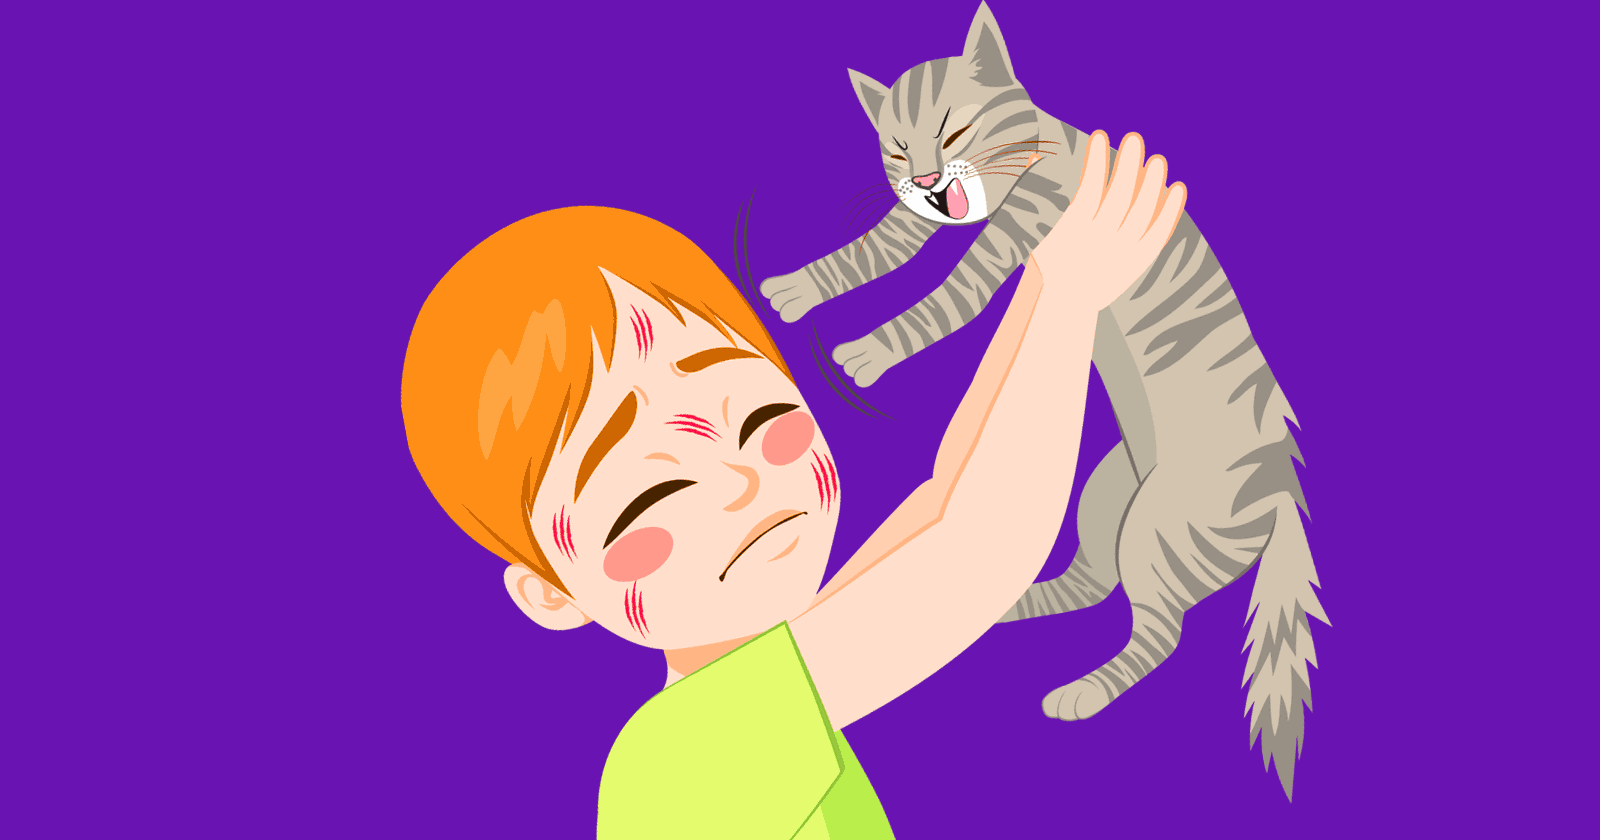 Image of a cat scratching a persons face, a metaphor for the "meow" database hacking attacks